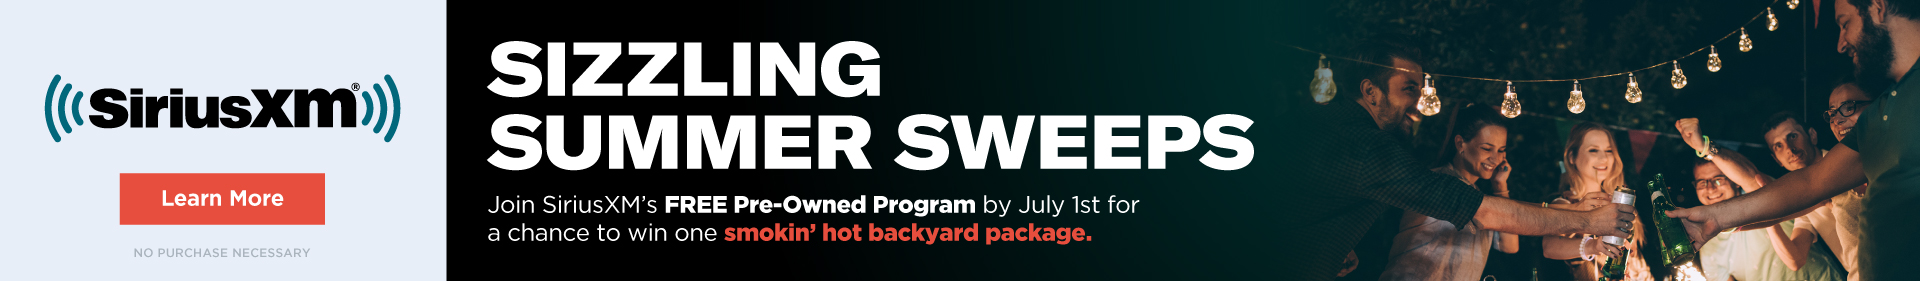 Join SiriusXM's FREE Pre-Owned Program by July 1, 2022 for a chance win one smokin' hot backyard package.